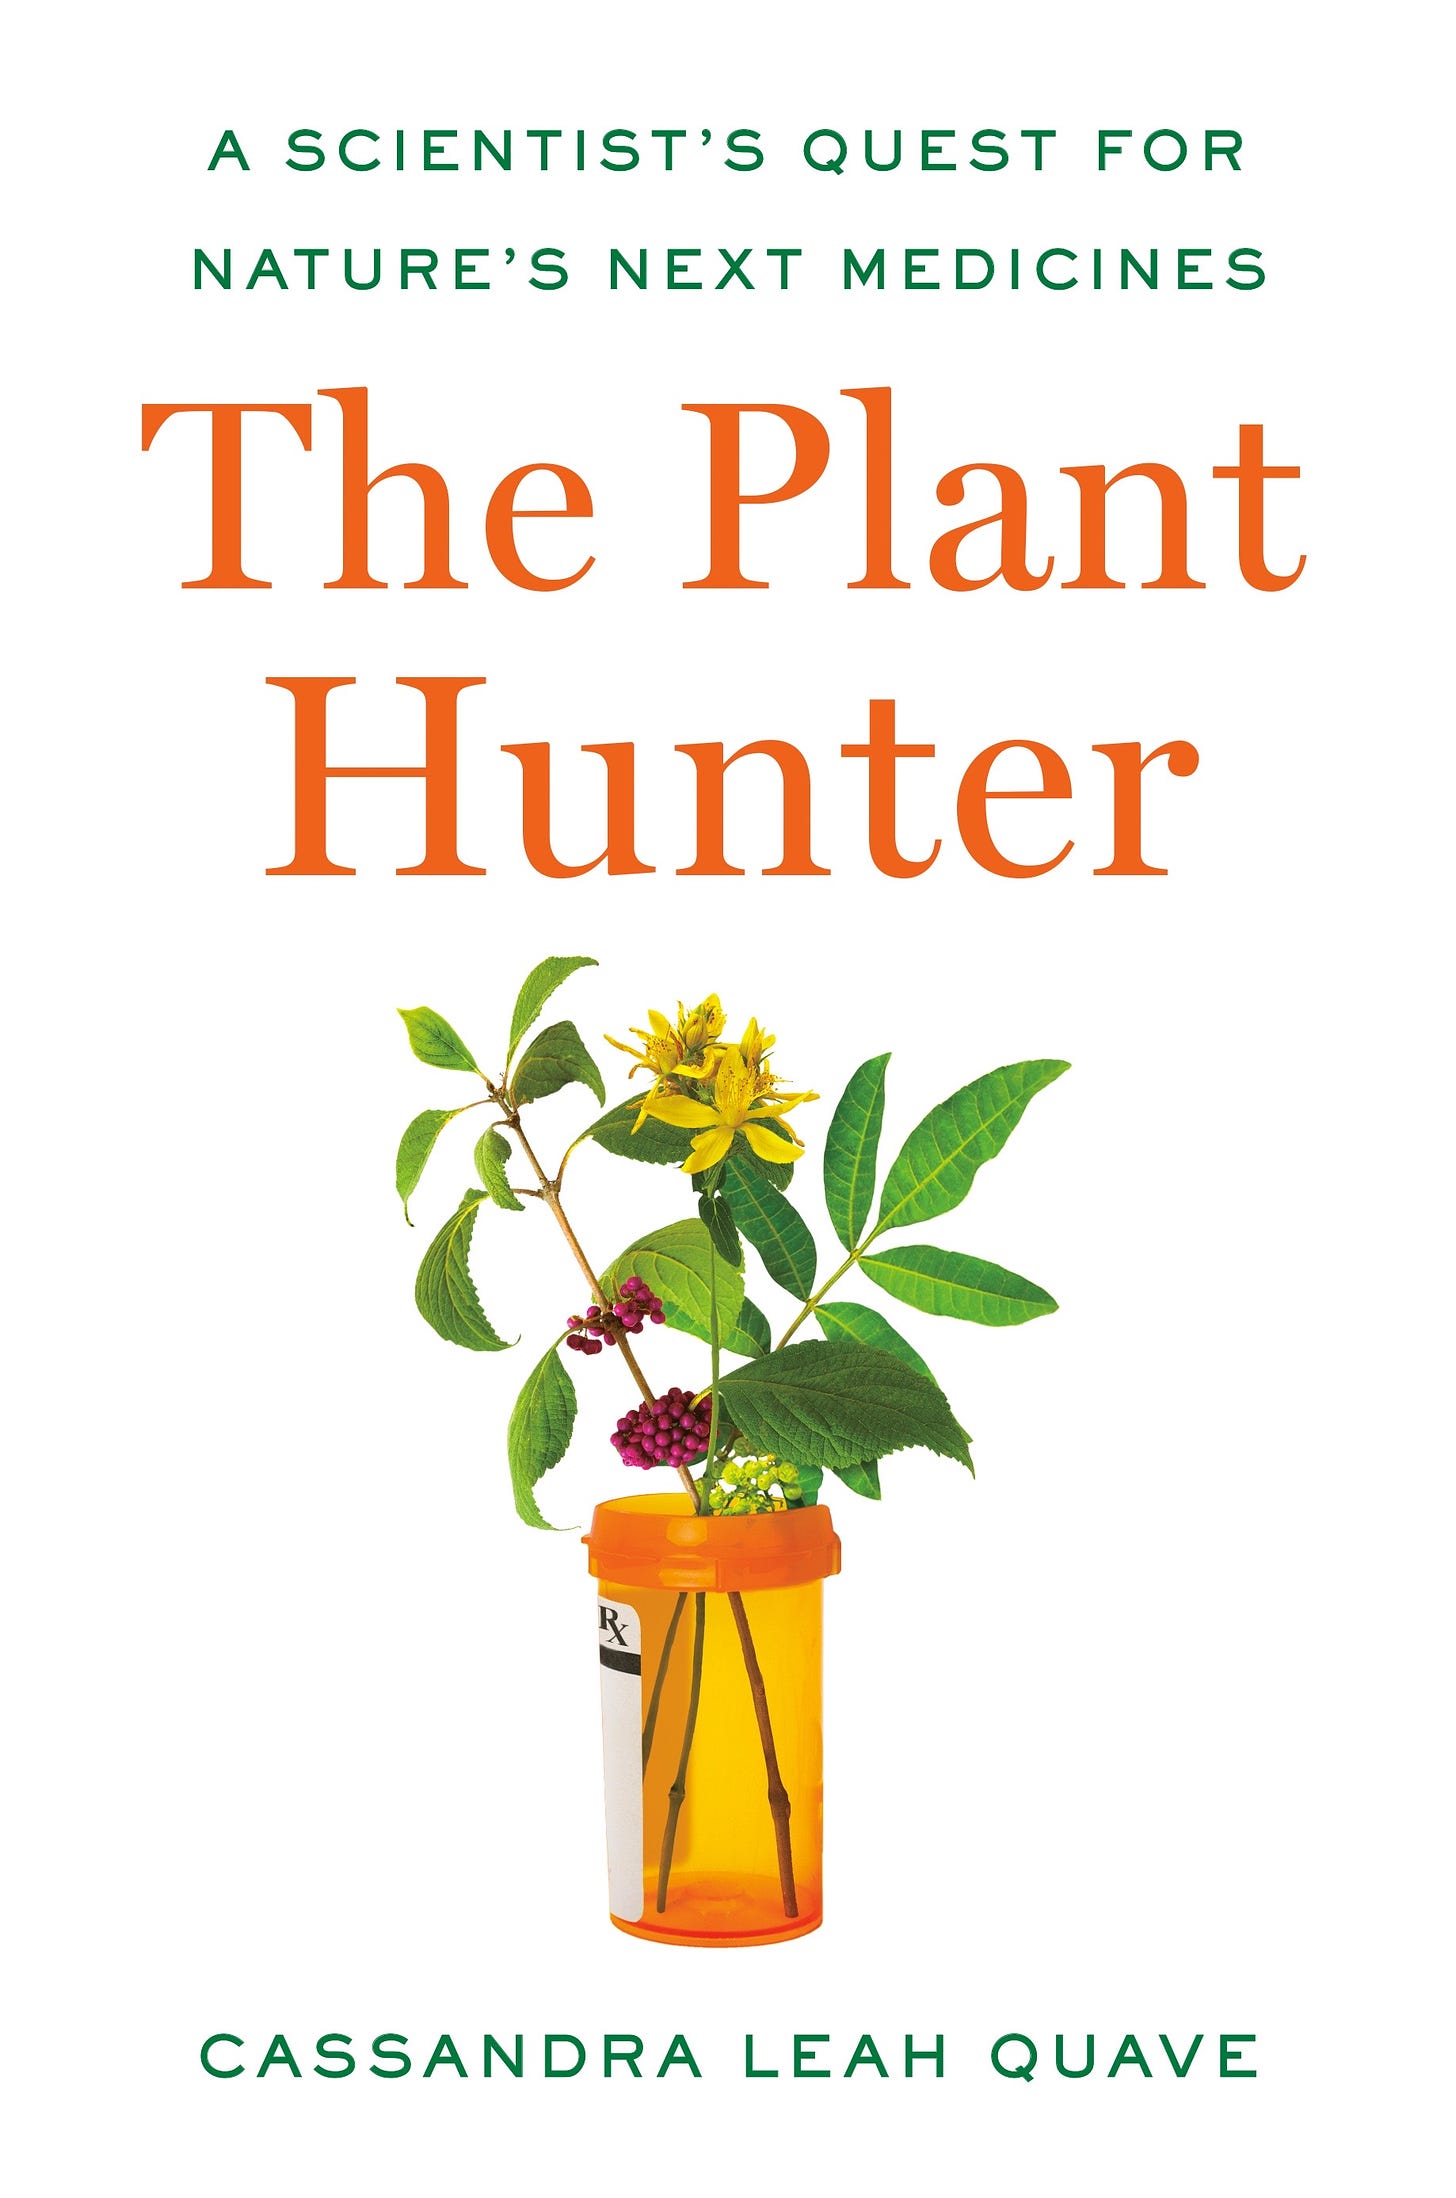 Cover of the book THE PLANT HUNTER by Dr. Cassandra Quave which shows a prescription bottle overflowing with various types of wildflowers and plants.